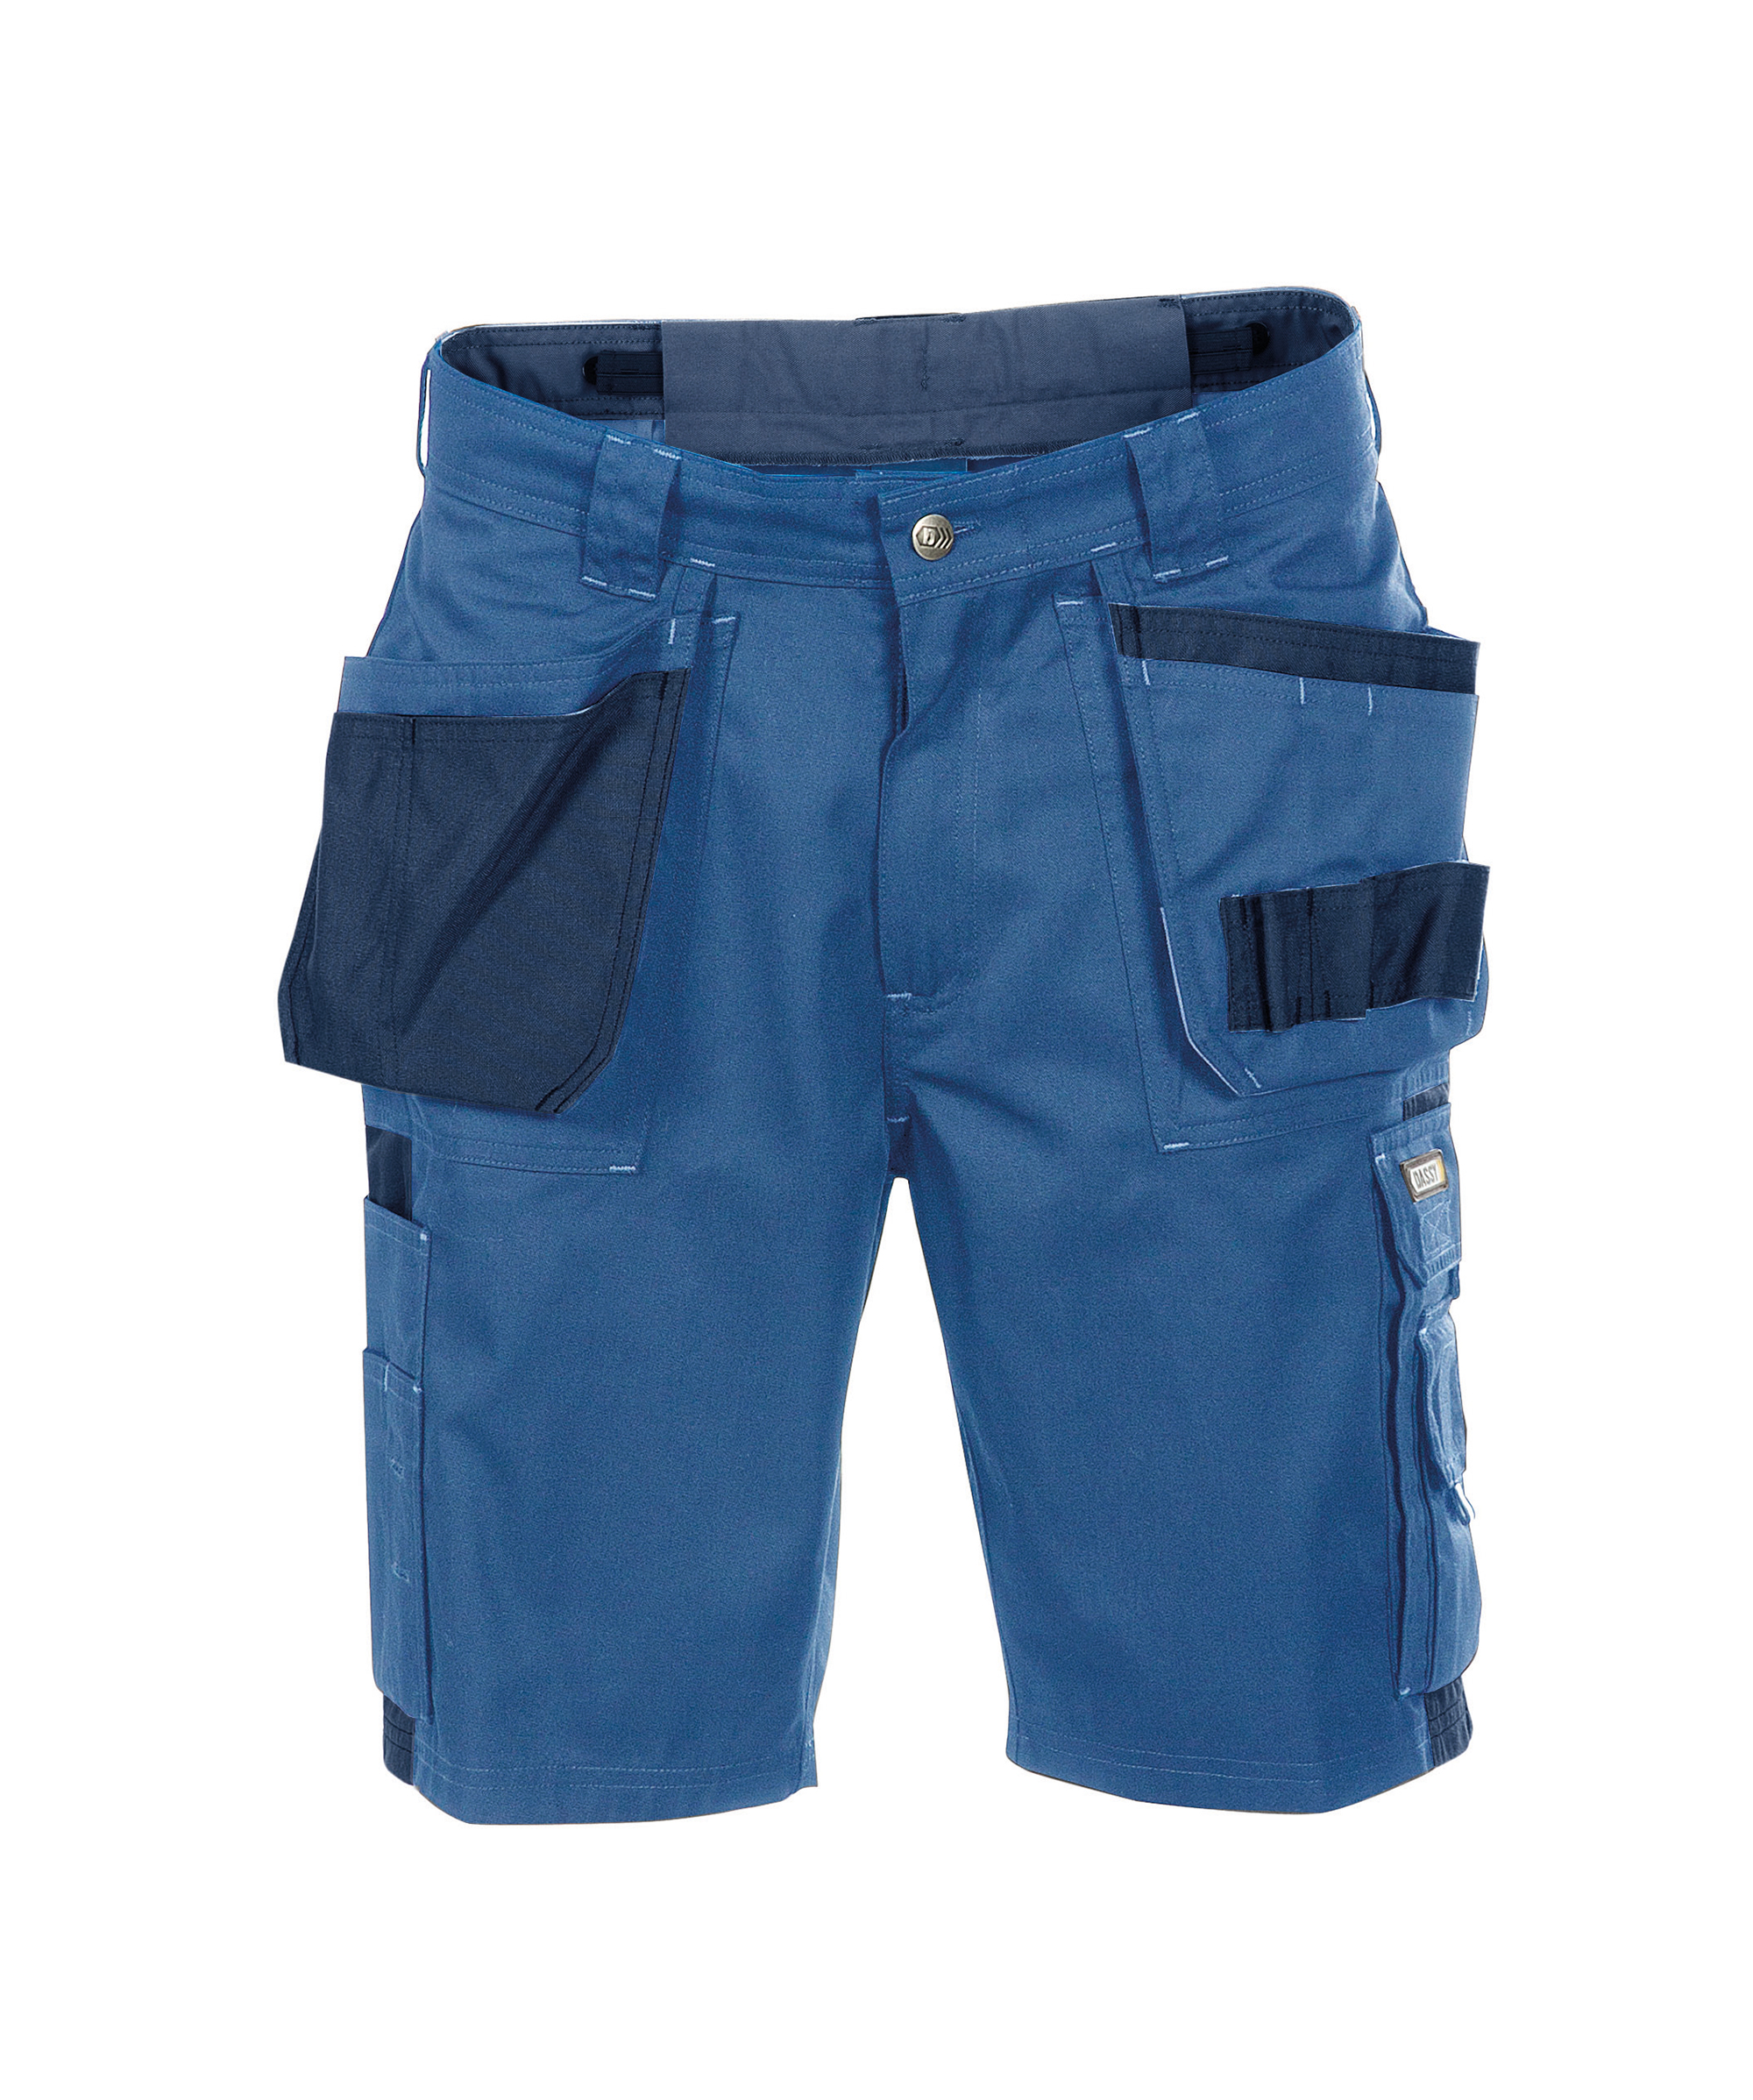 monza_two-tone-work-shorts-with-multi-pockets_royal-blue-navy_front.jpg